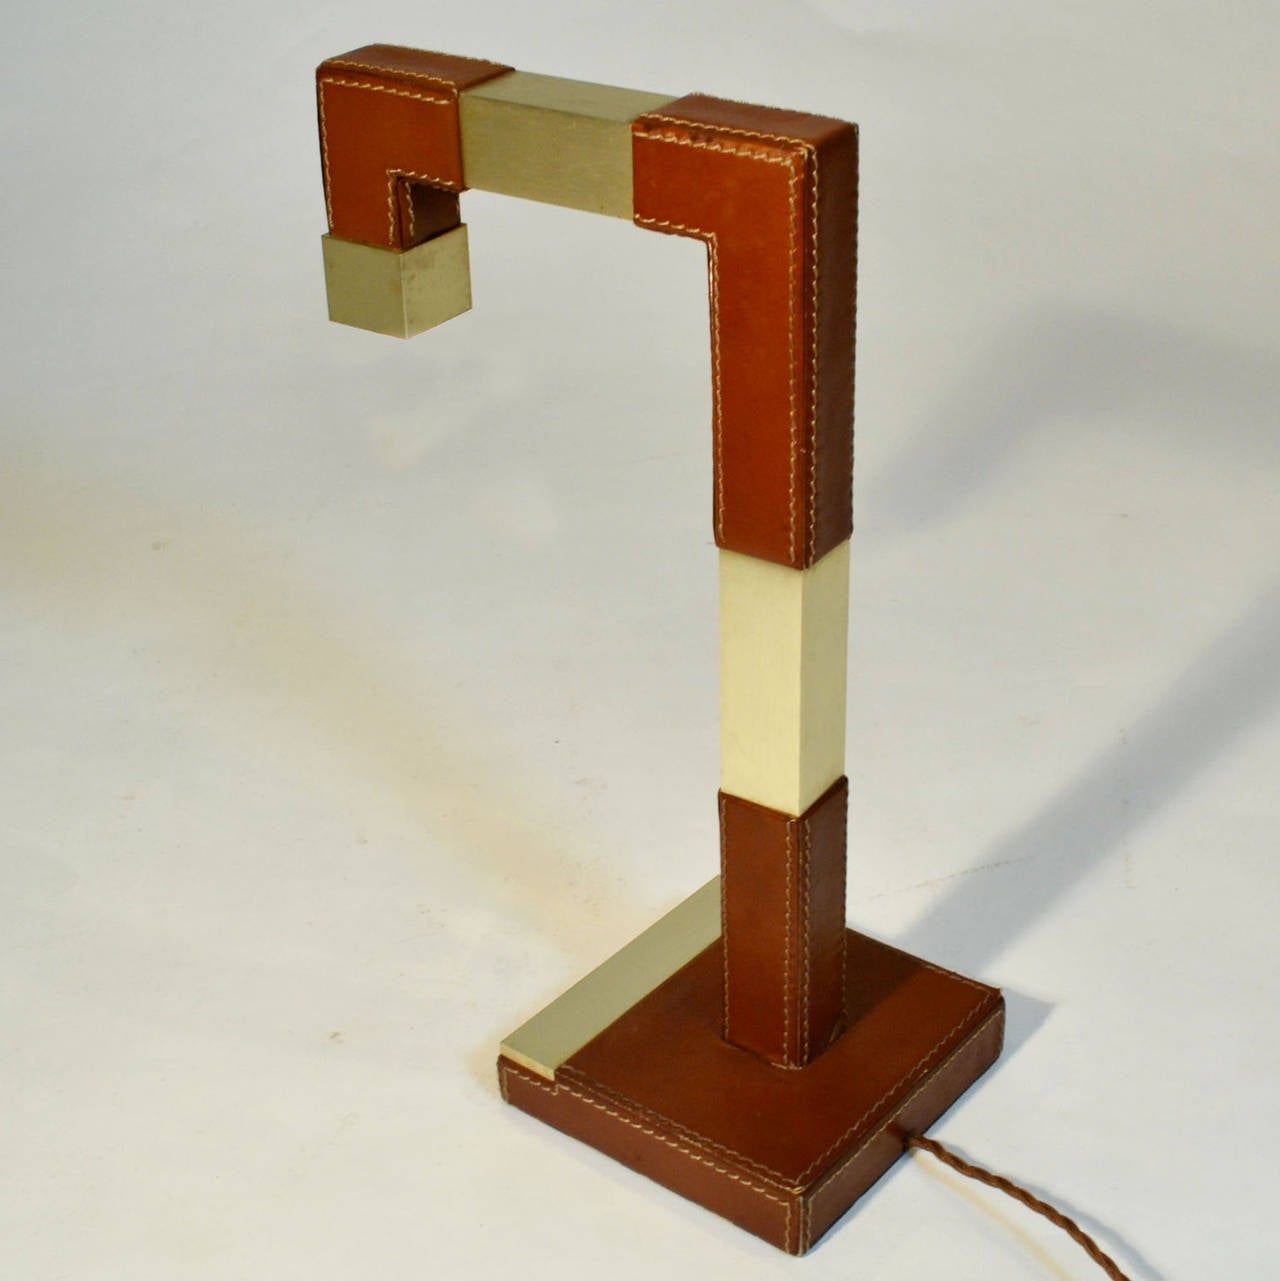 Rectangular table lamp in stitched mid brown hide leather and brushed brass by Tanneur, France 1970's.